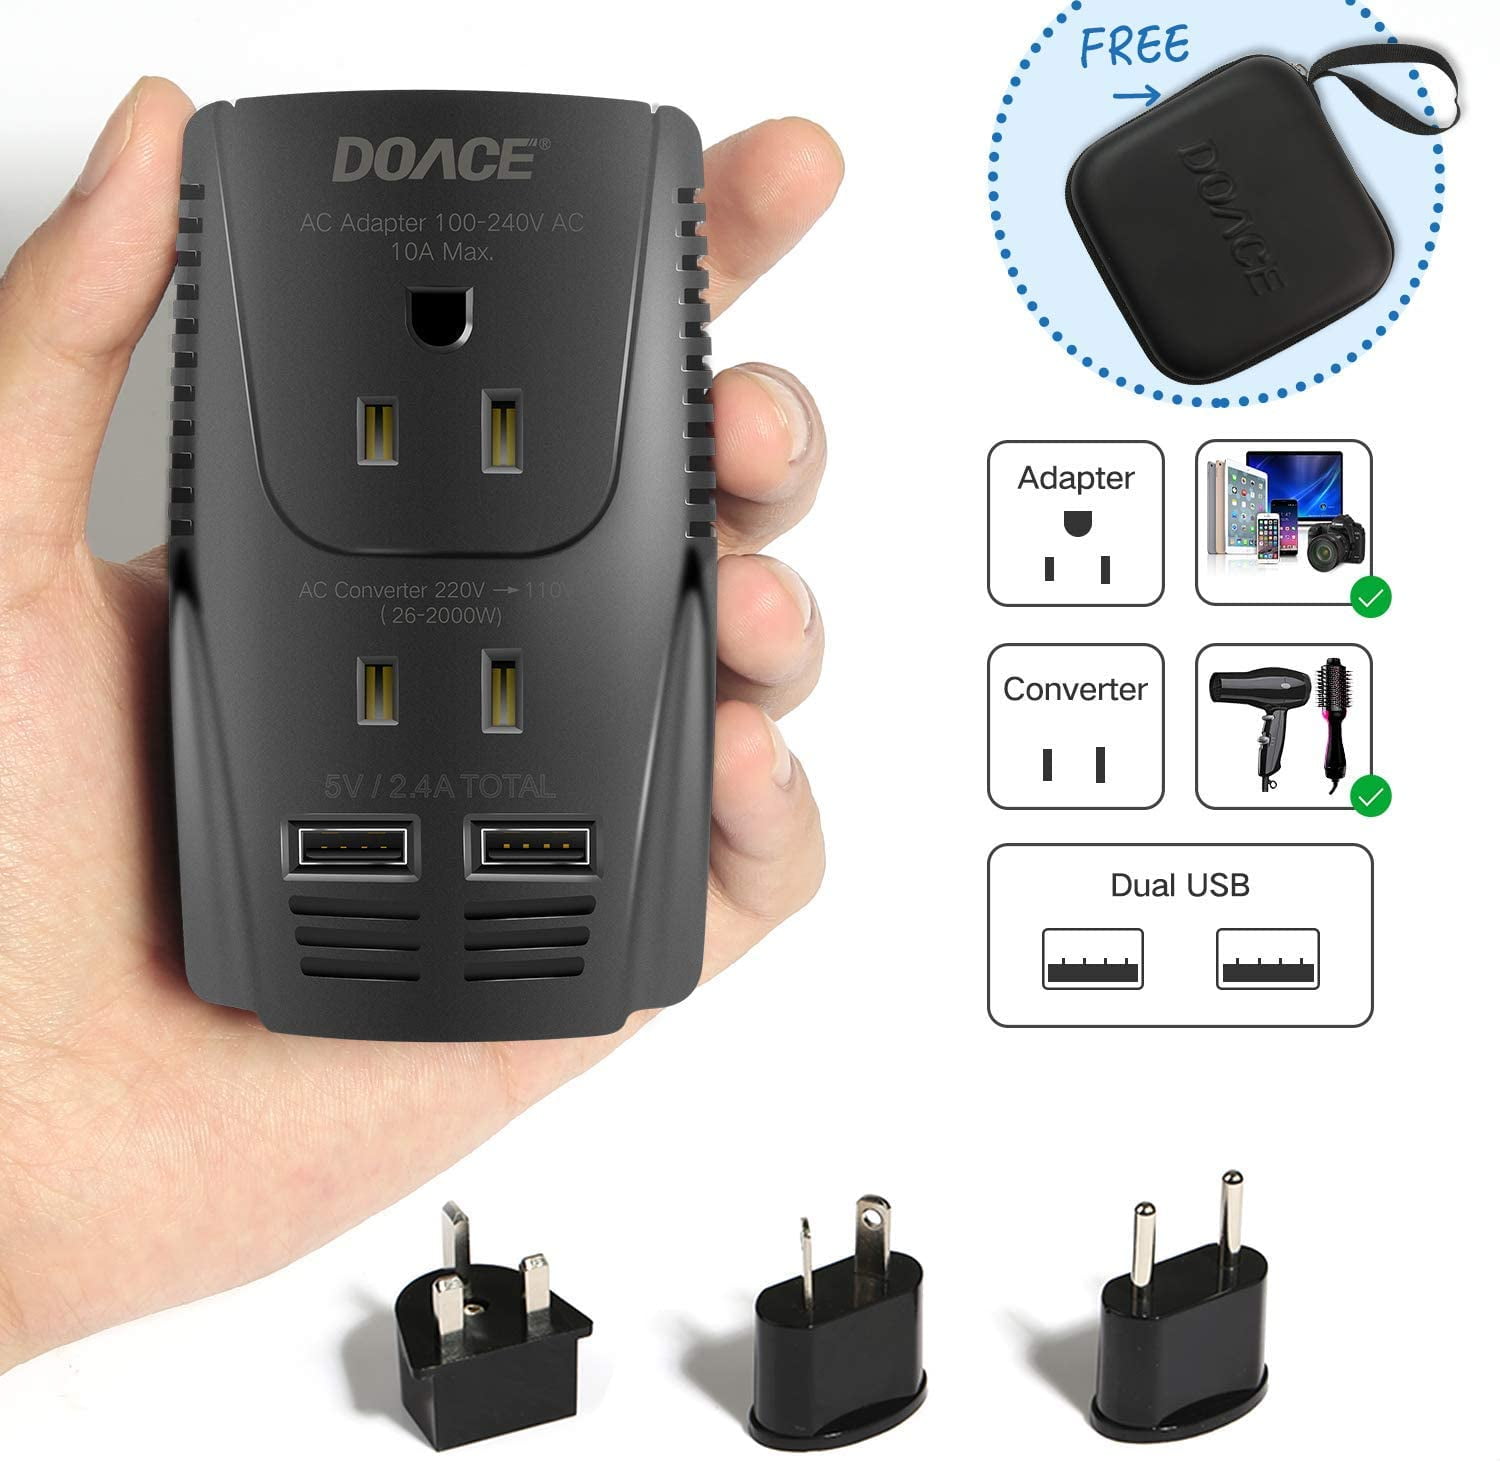 Step Down 220V to 110V 2019 Upgraded DOACE 2000W Travel Voltage Converter for Hair Dryer Straightener Flat Iron 10A Power Adapter with 2-Port USB EU/UK/AU/US Plugs for Laptop Camera Cell Phone 